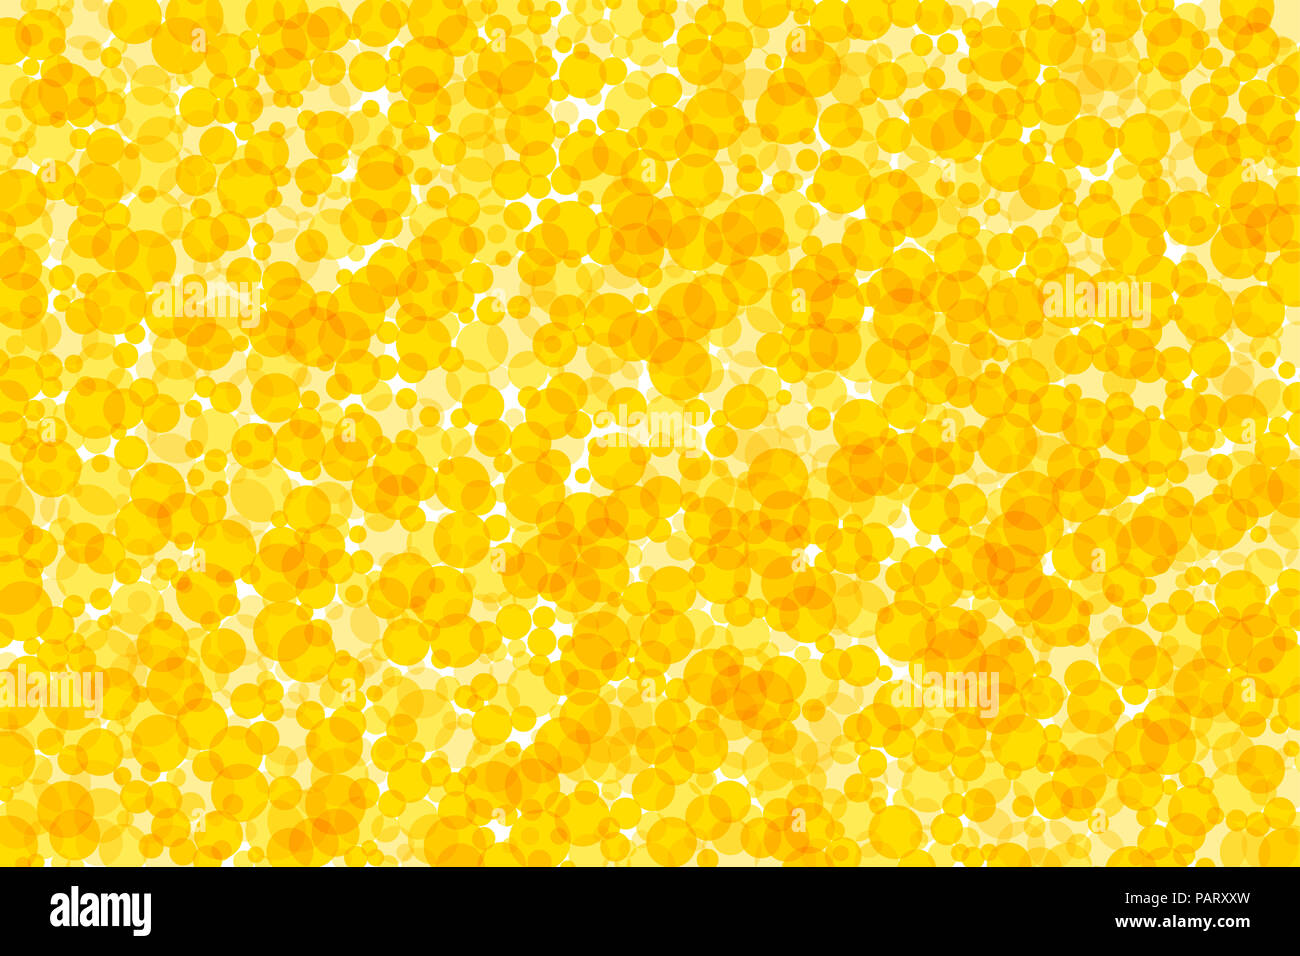 Background made of yellow and orange dots. Translucent spots forming a bright area. Golden, sunny and radiant decor. Illustration. Stock Photo